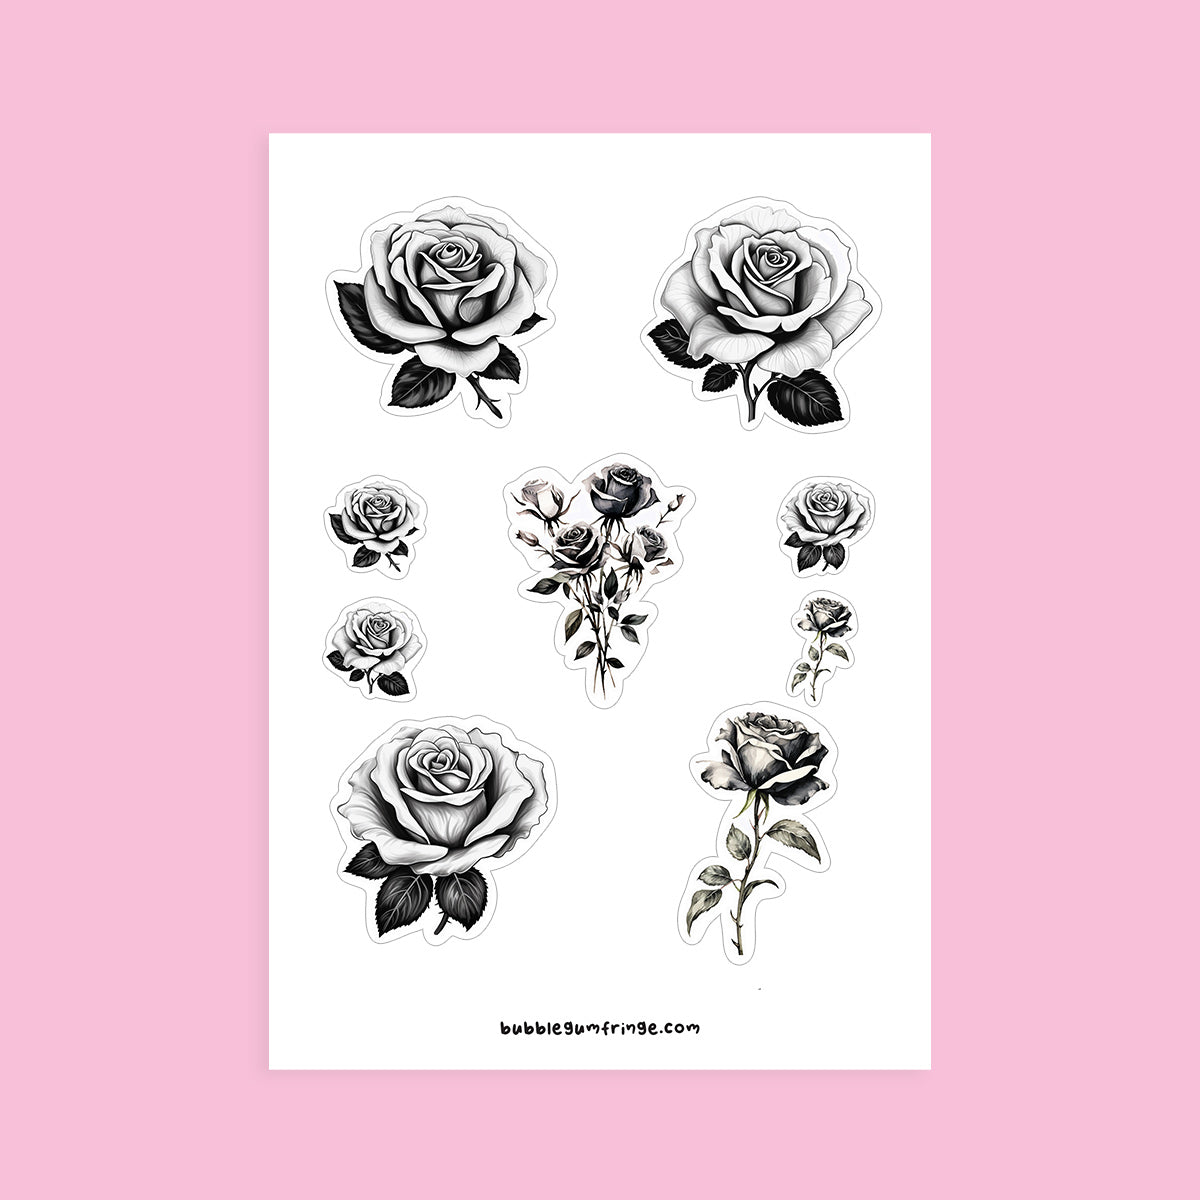 Sticker sheet with black and white roses-style 1